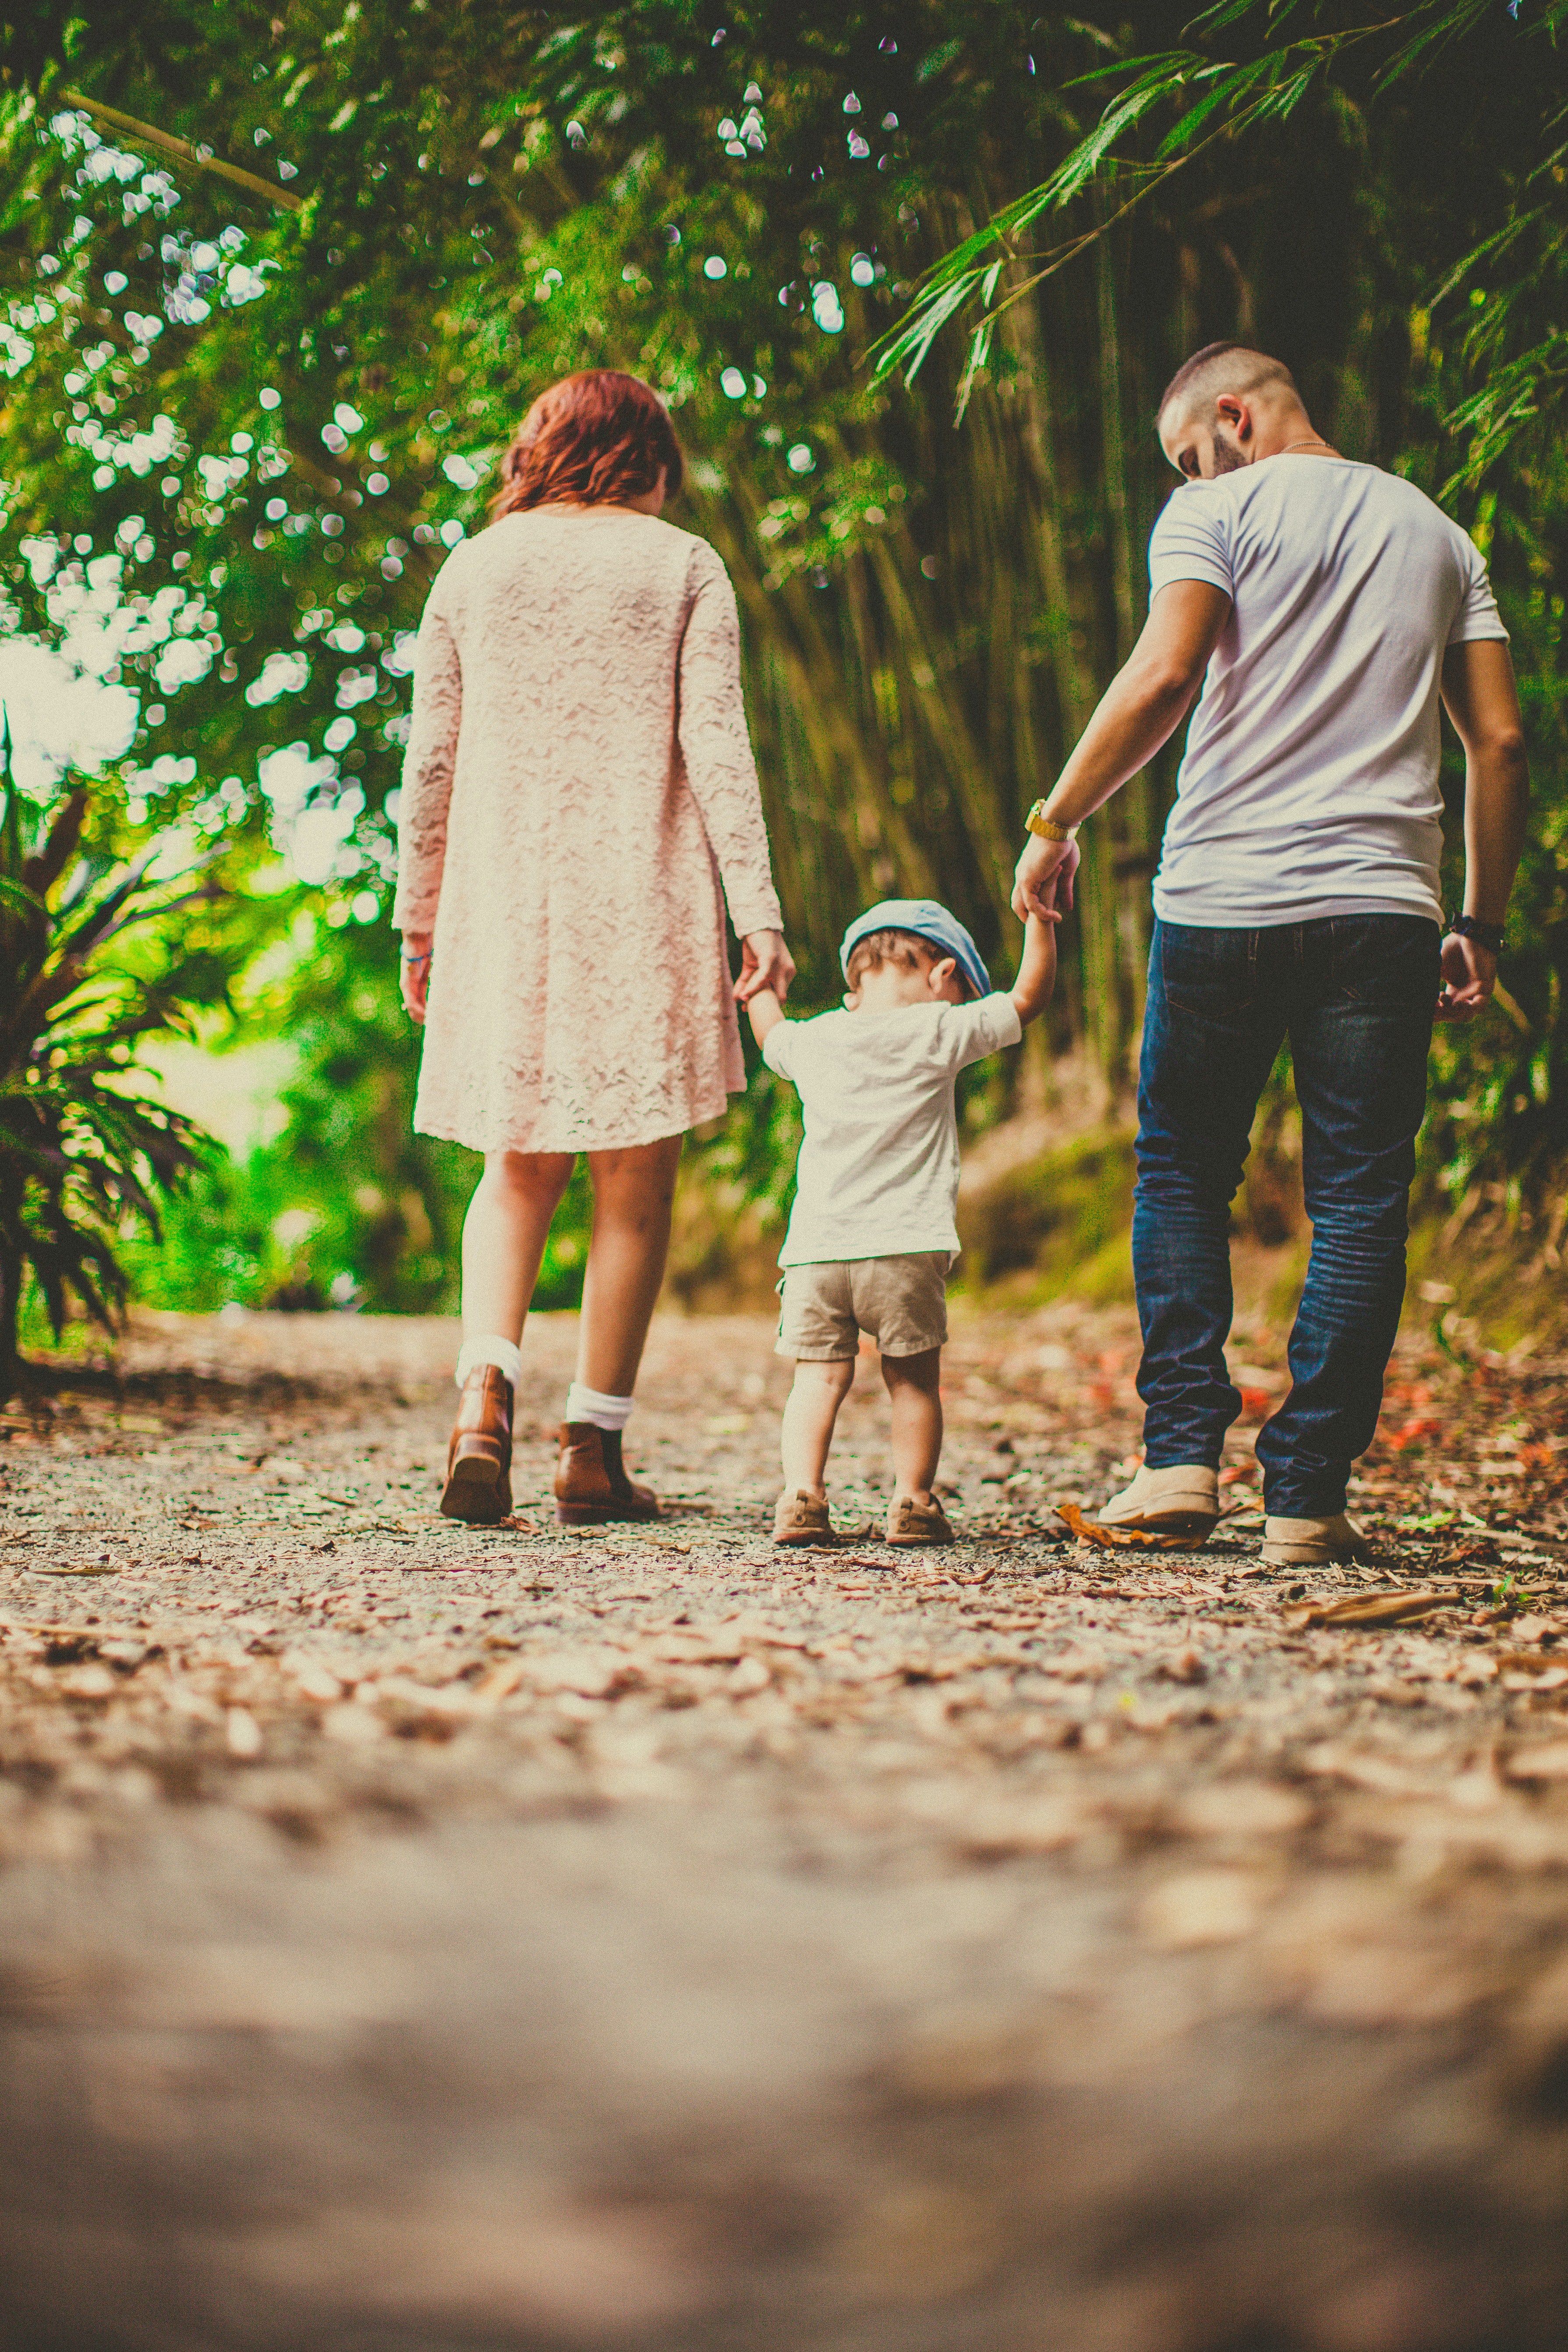 Finally, I have a family I always dreamed of | Photo: Pexels